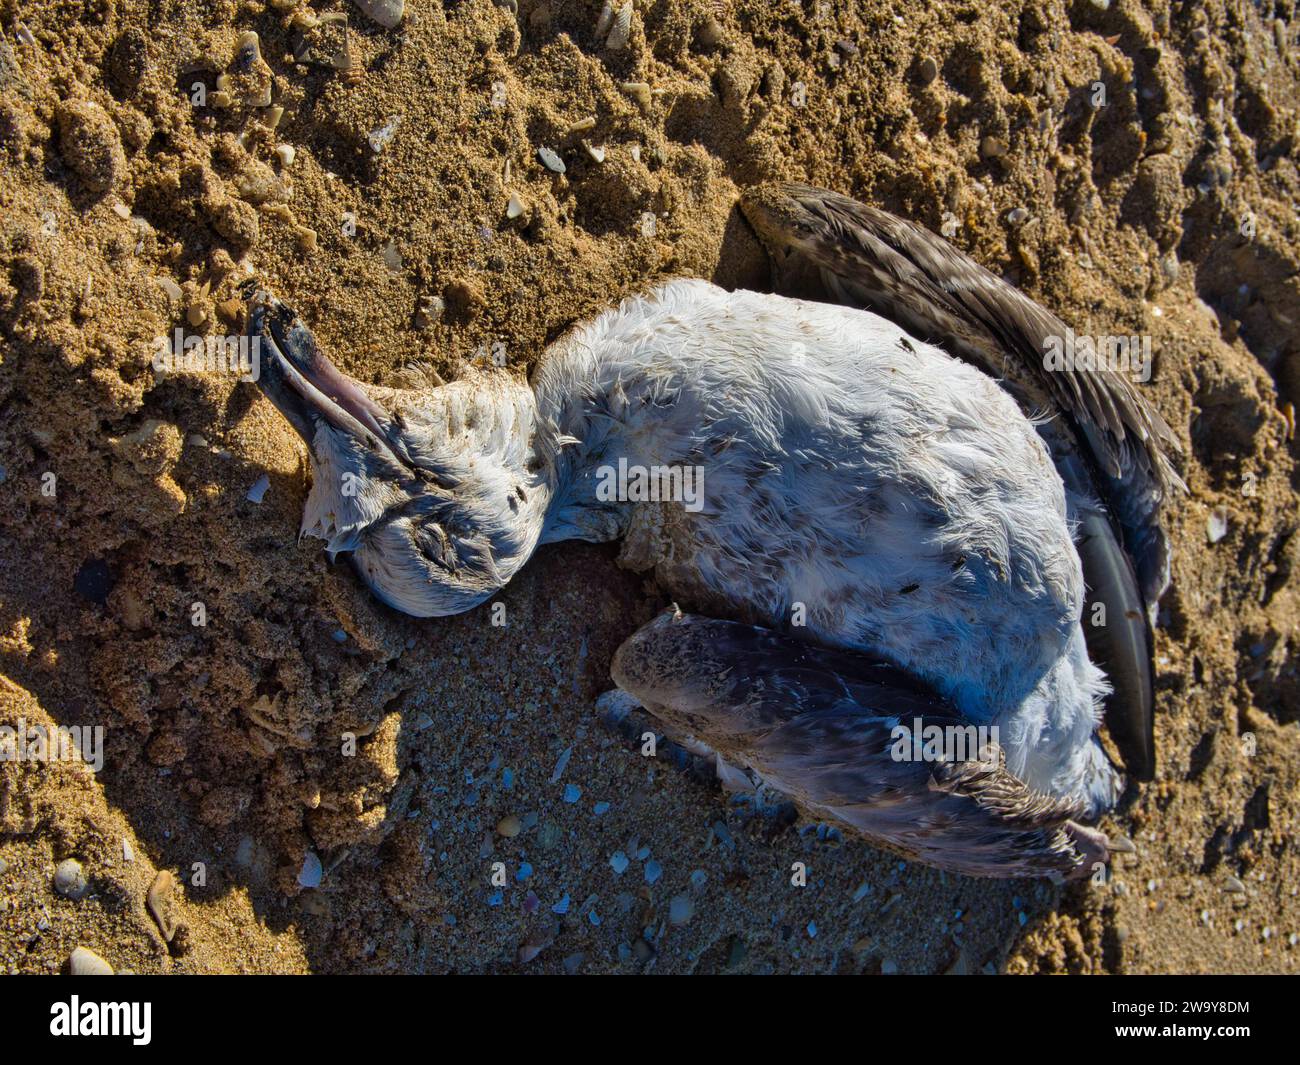 Dead seagull on its back on the sand on a beach with some flies Stock Photo